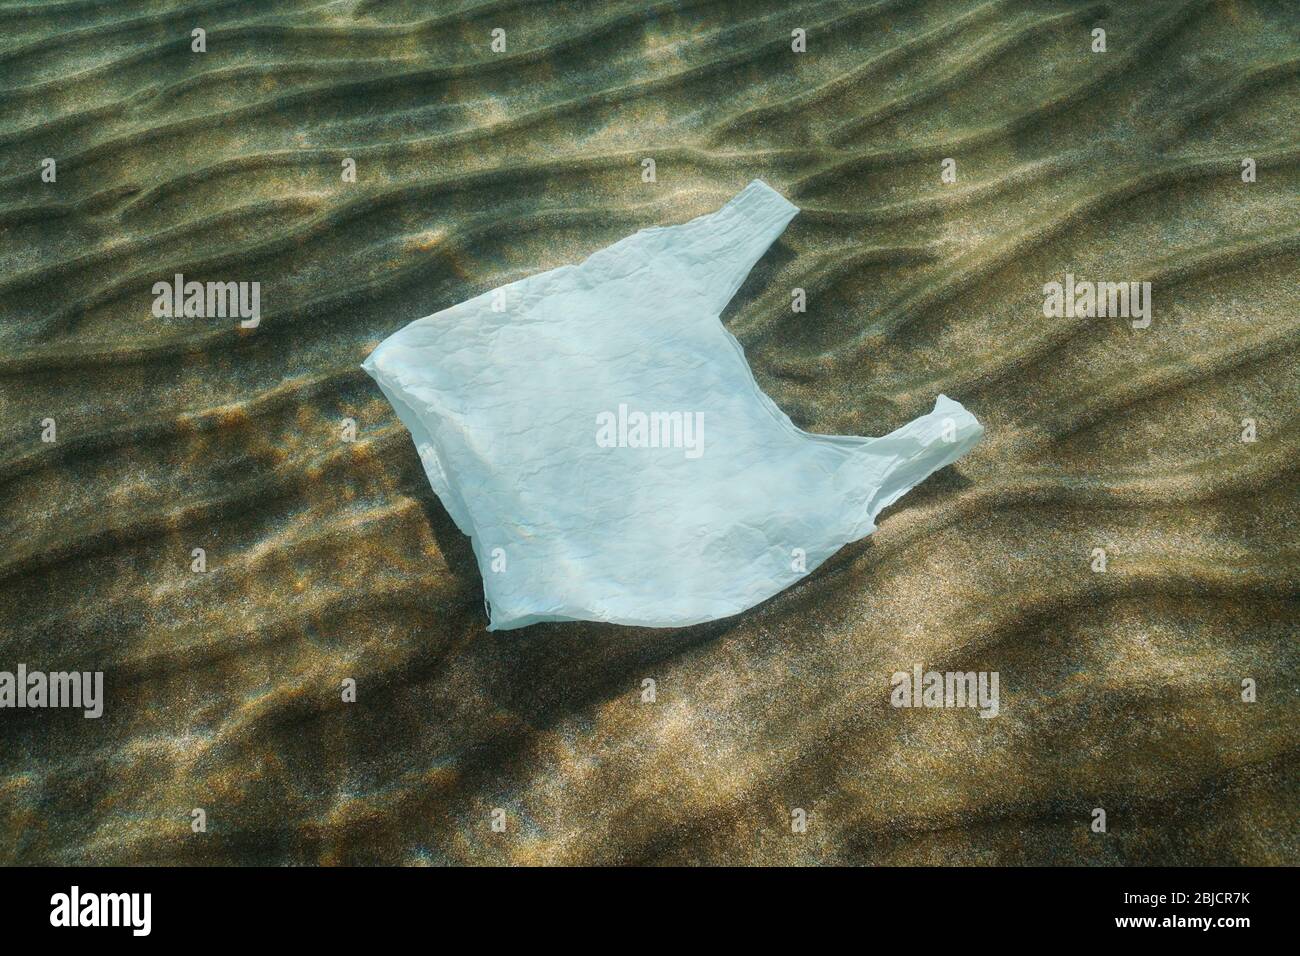 Plastic pollution in the ocean, a white plastic bag underwater on a sandy bottom Stock Photo